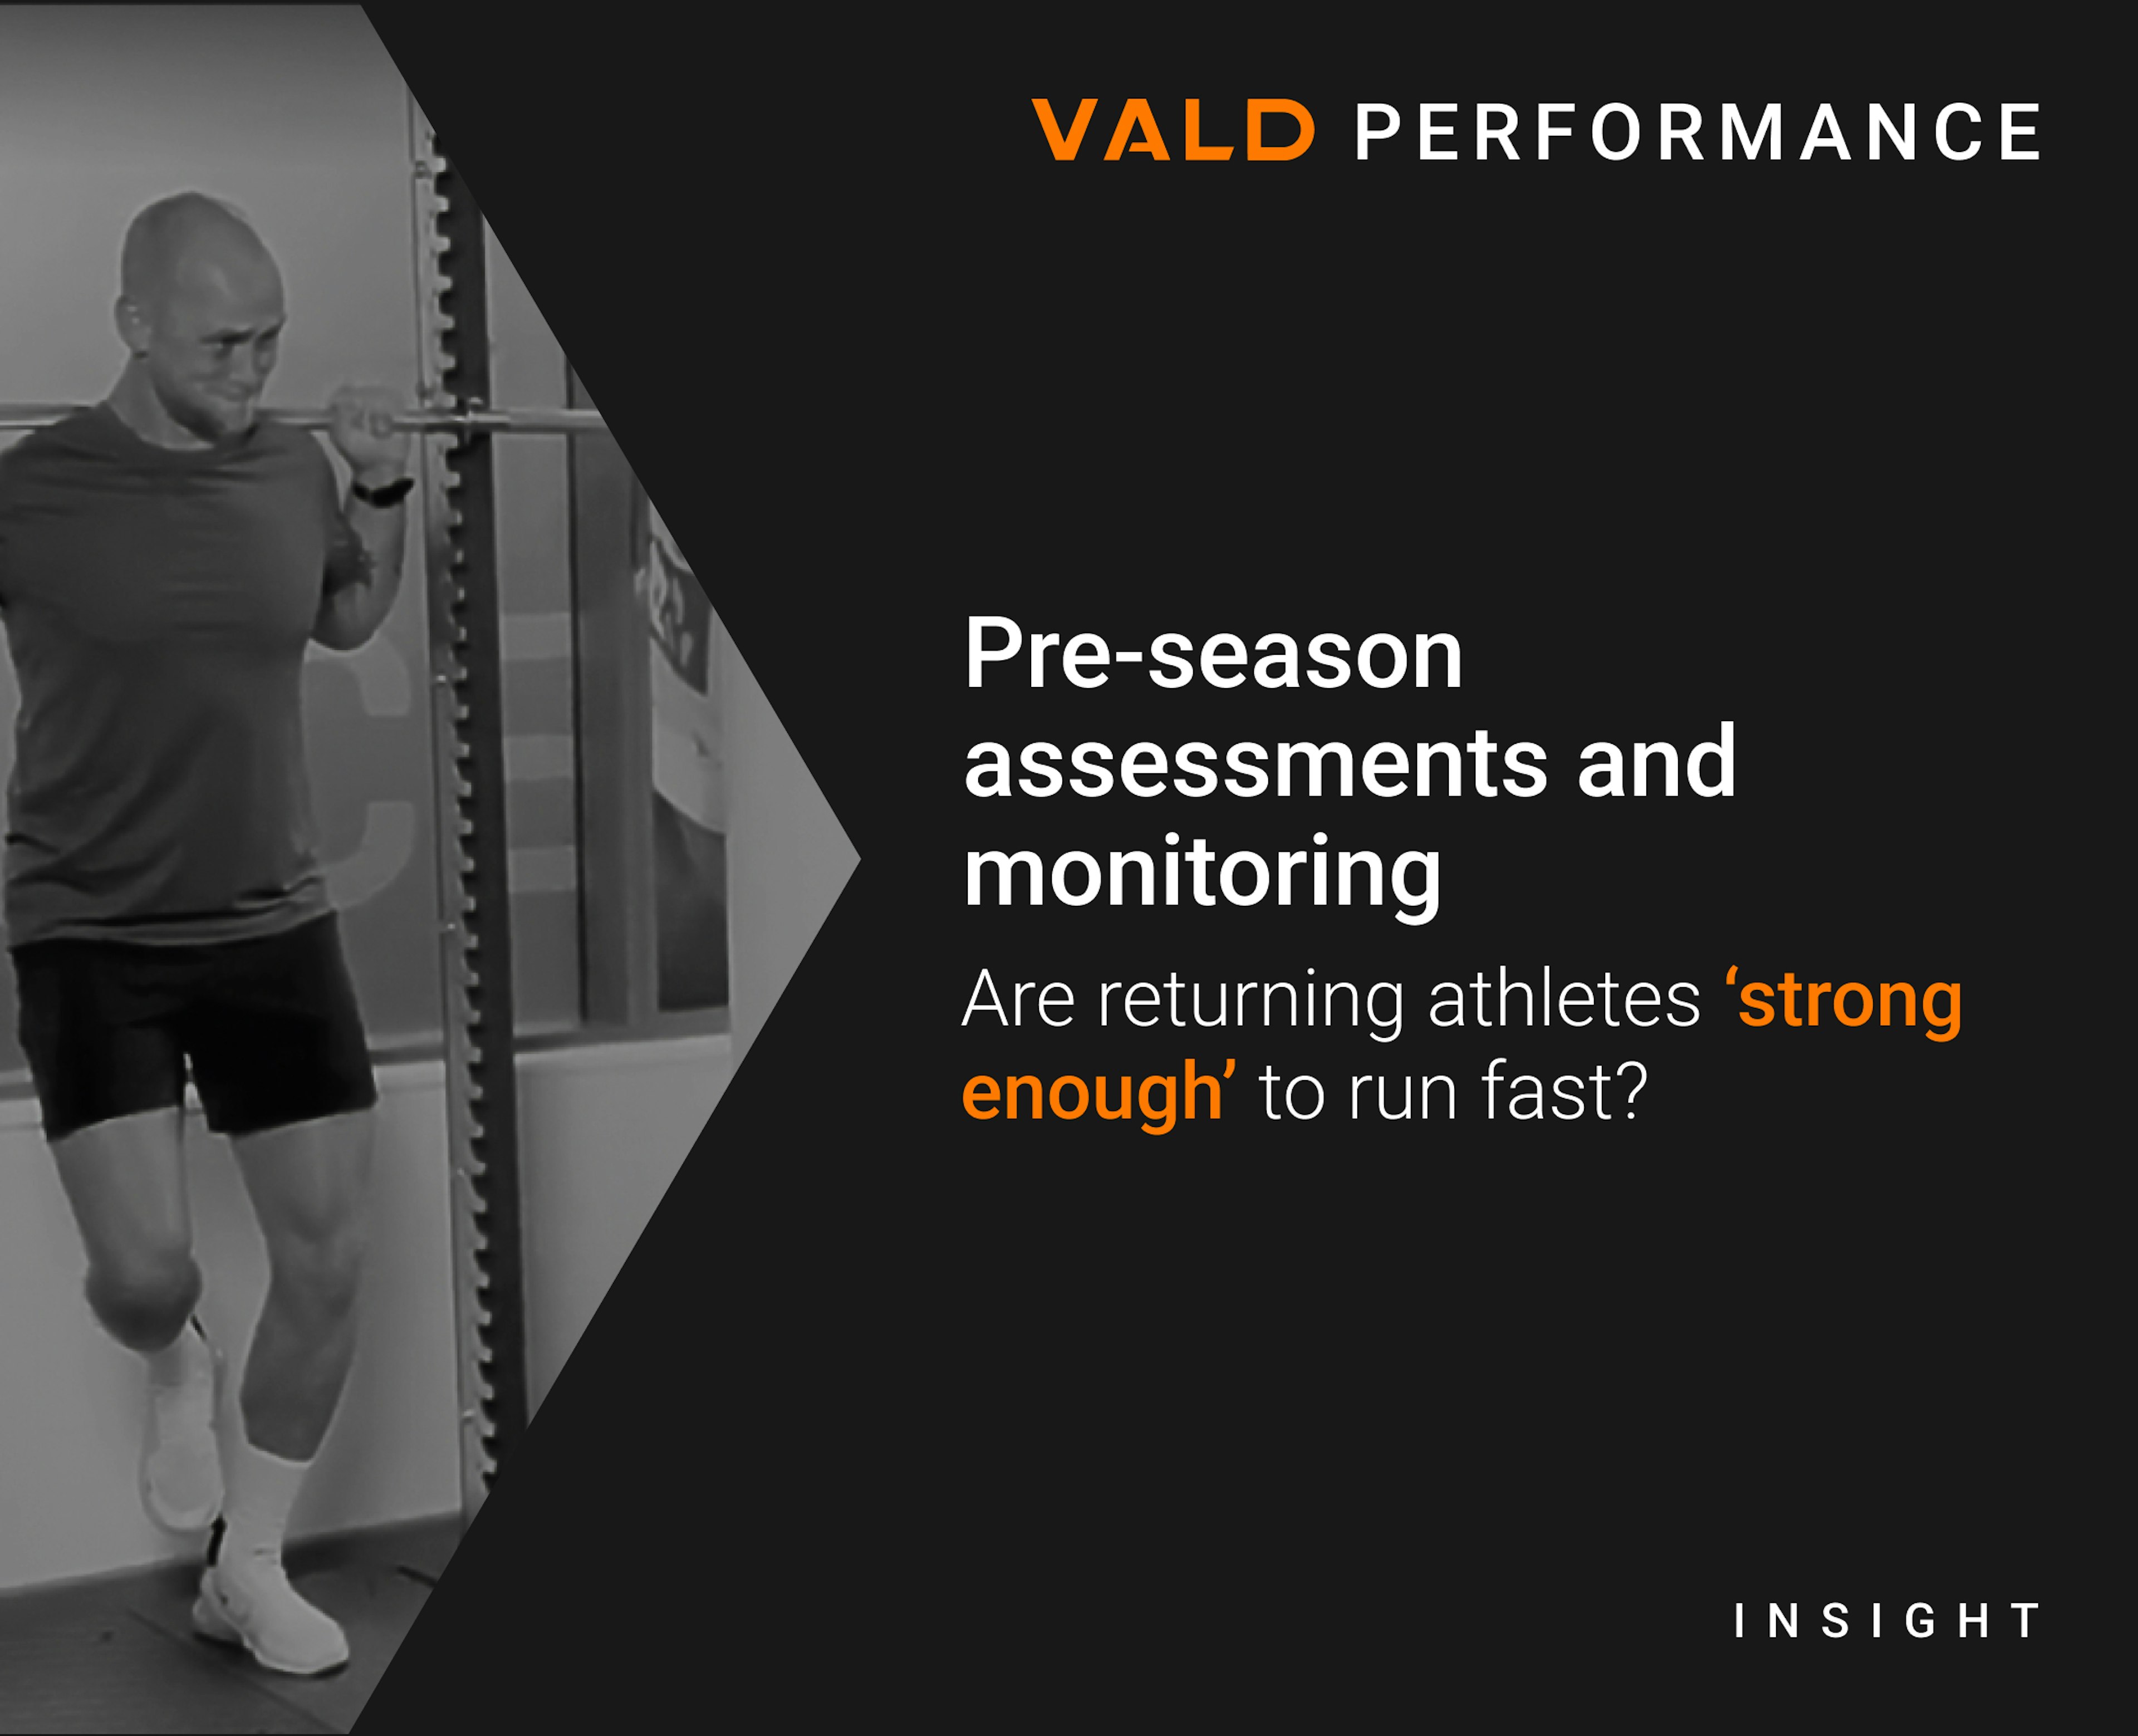 Thumbnail - Pre-season assessments and monitoring: are returning athletes ‘strong enough’ to run fast?